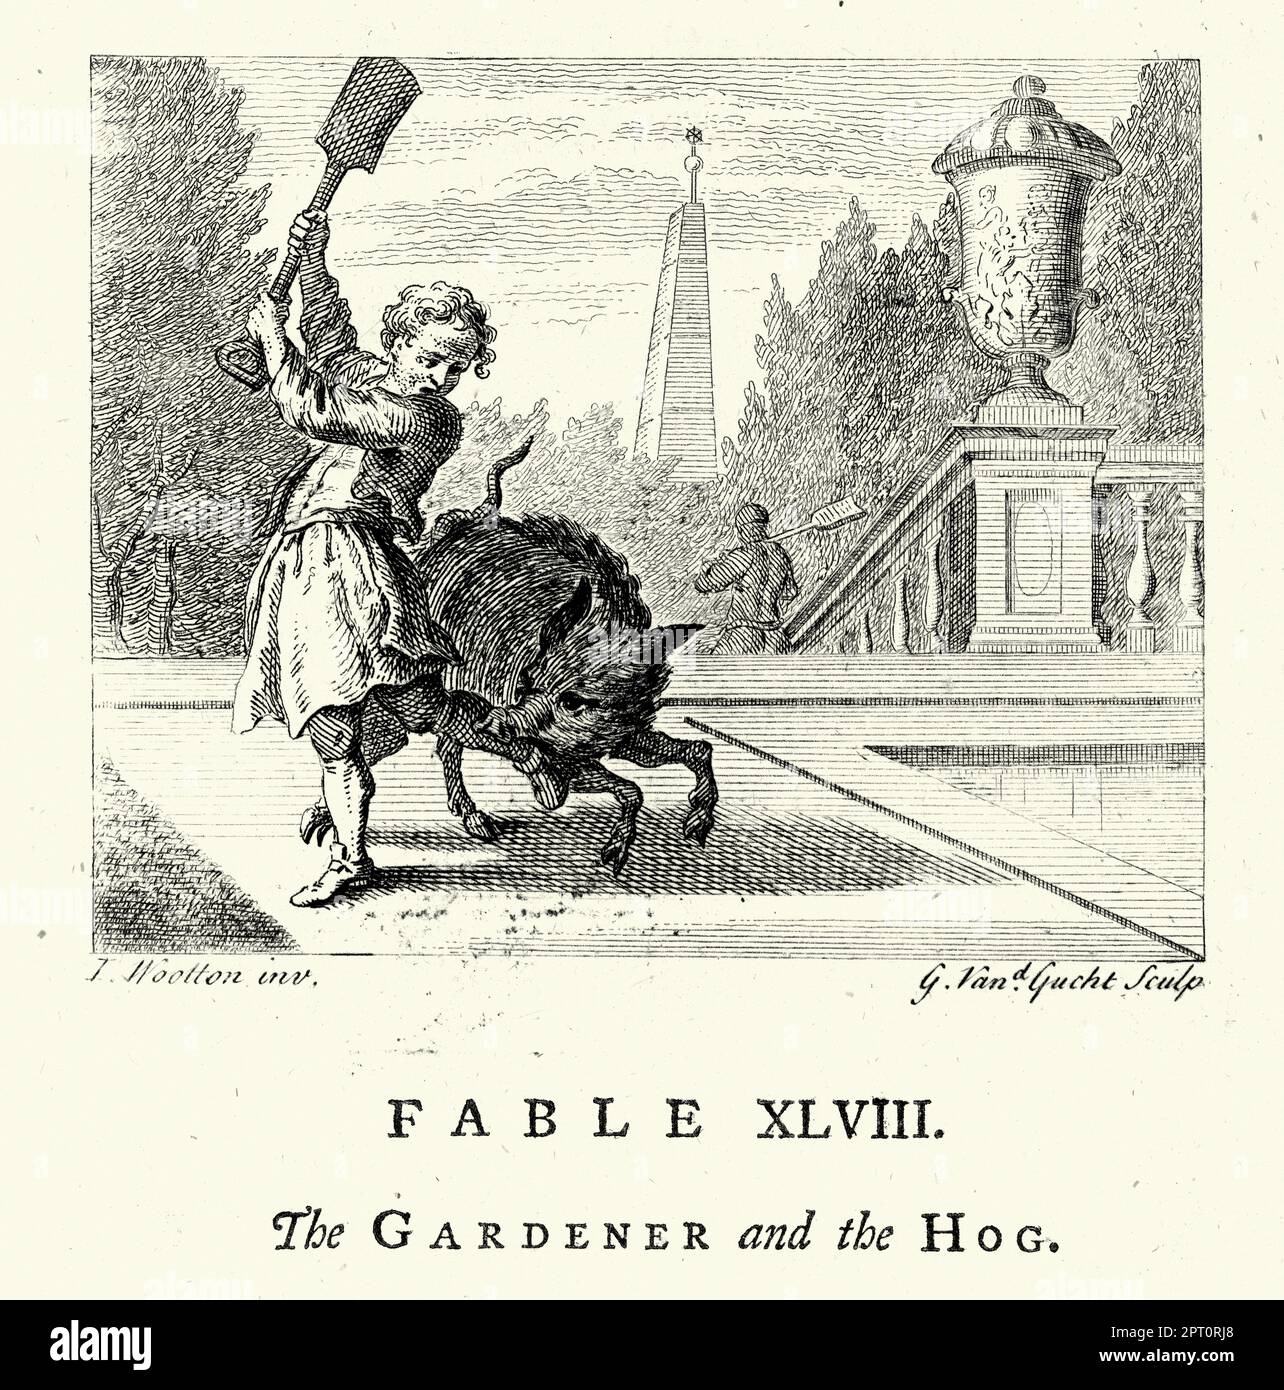 Vintage illustration Fable of the Gardener and the Hog, Wild Boar attacking a man in a garden, 18th Century. From the Fables of John Gay Stock Photo